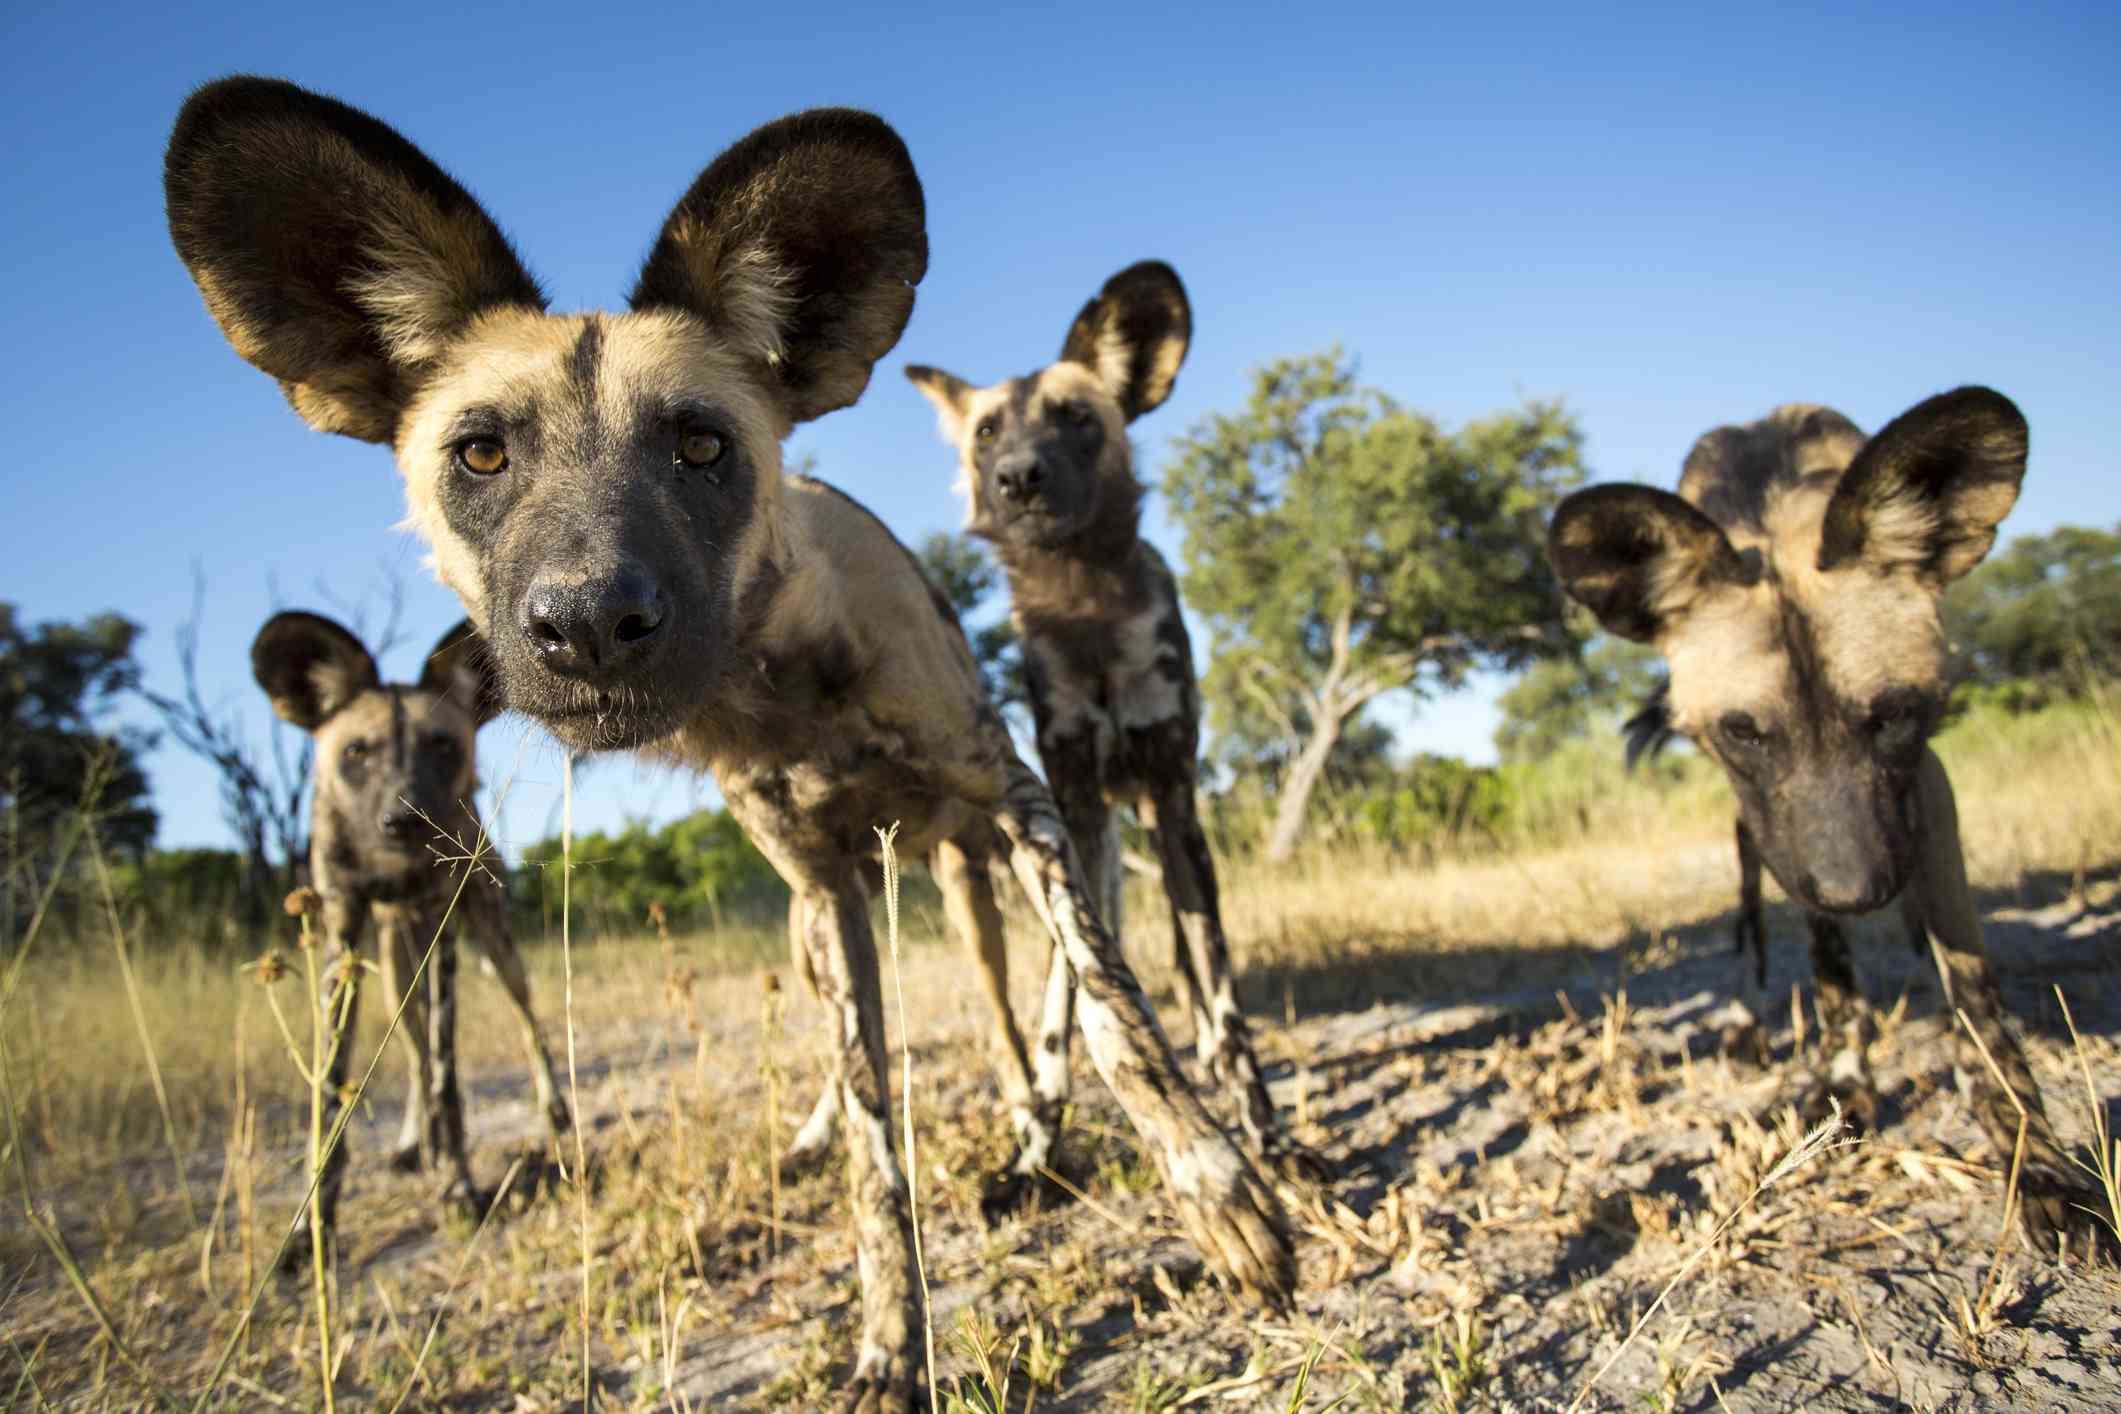 Spotted wild dogs with large round ears looking close at the camera.